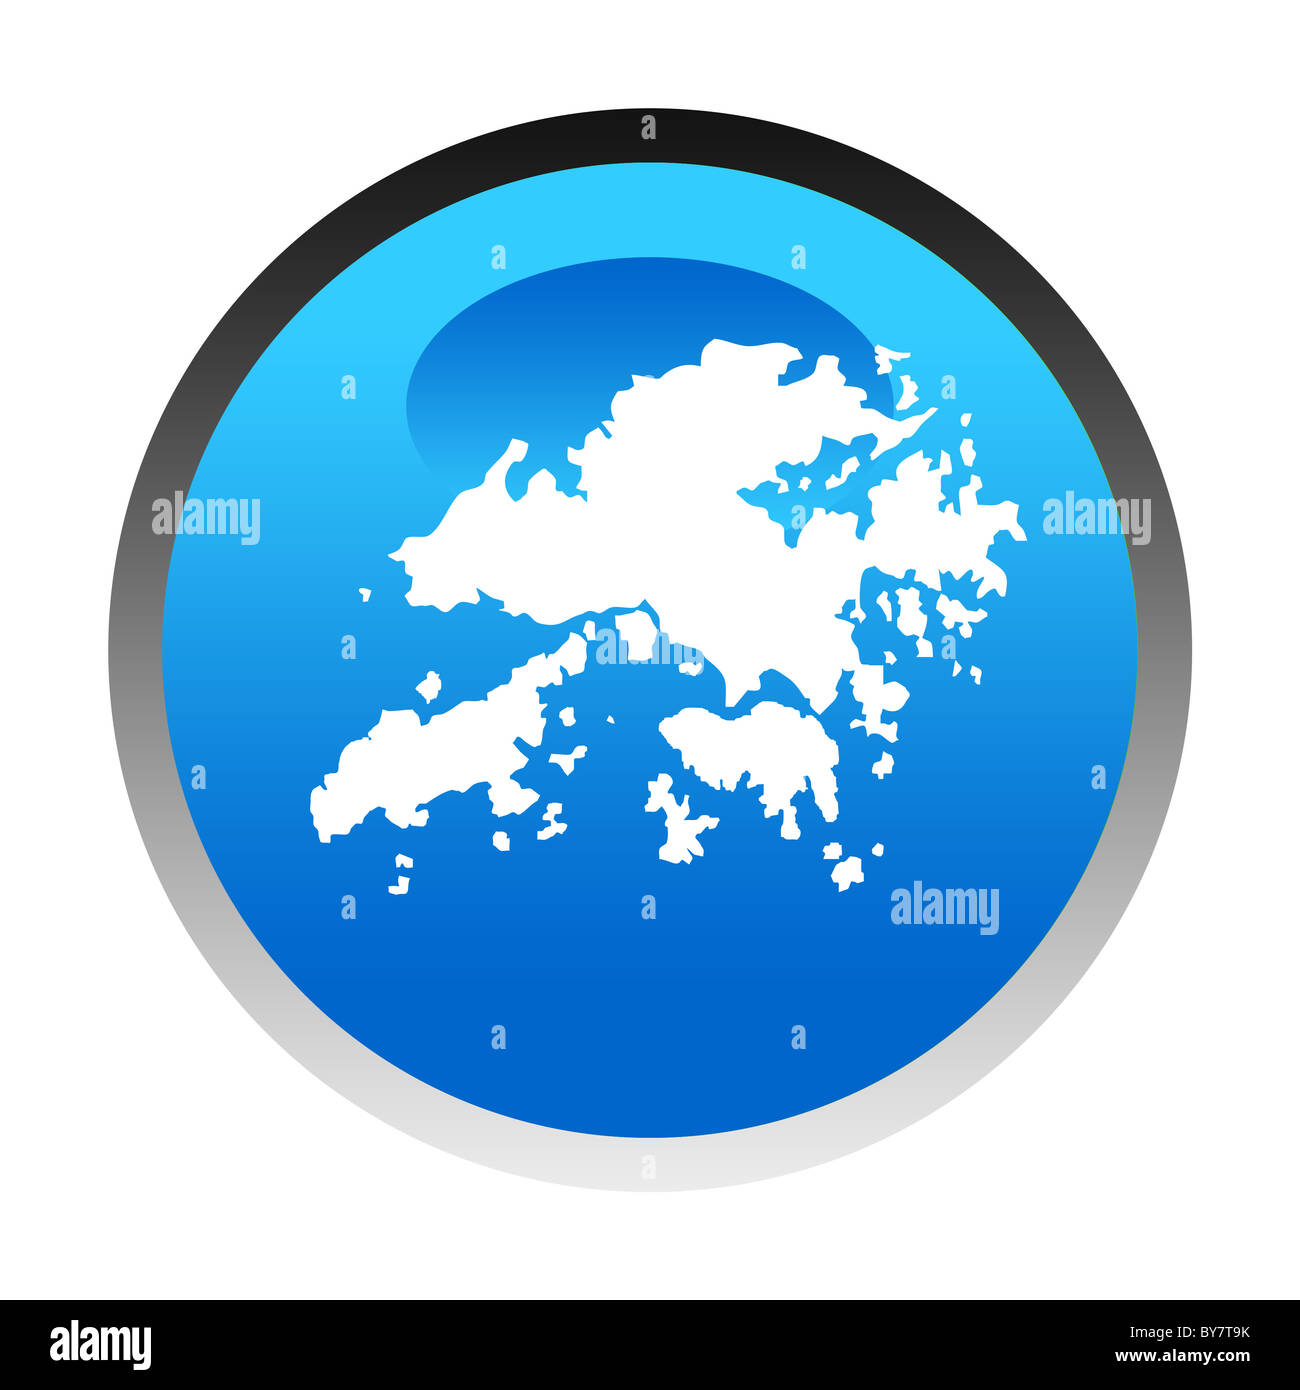 Hong Kong Islands map blue circular button isolated on white background. Stock Photo